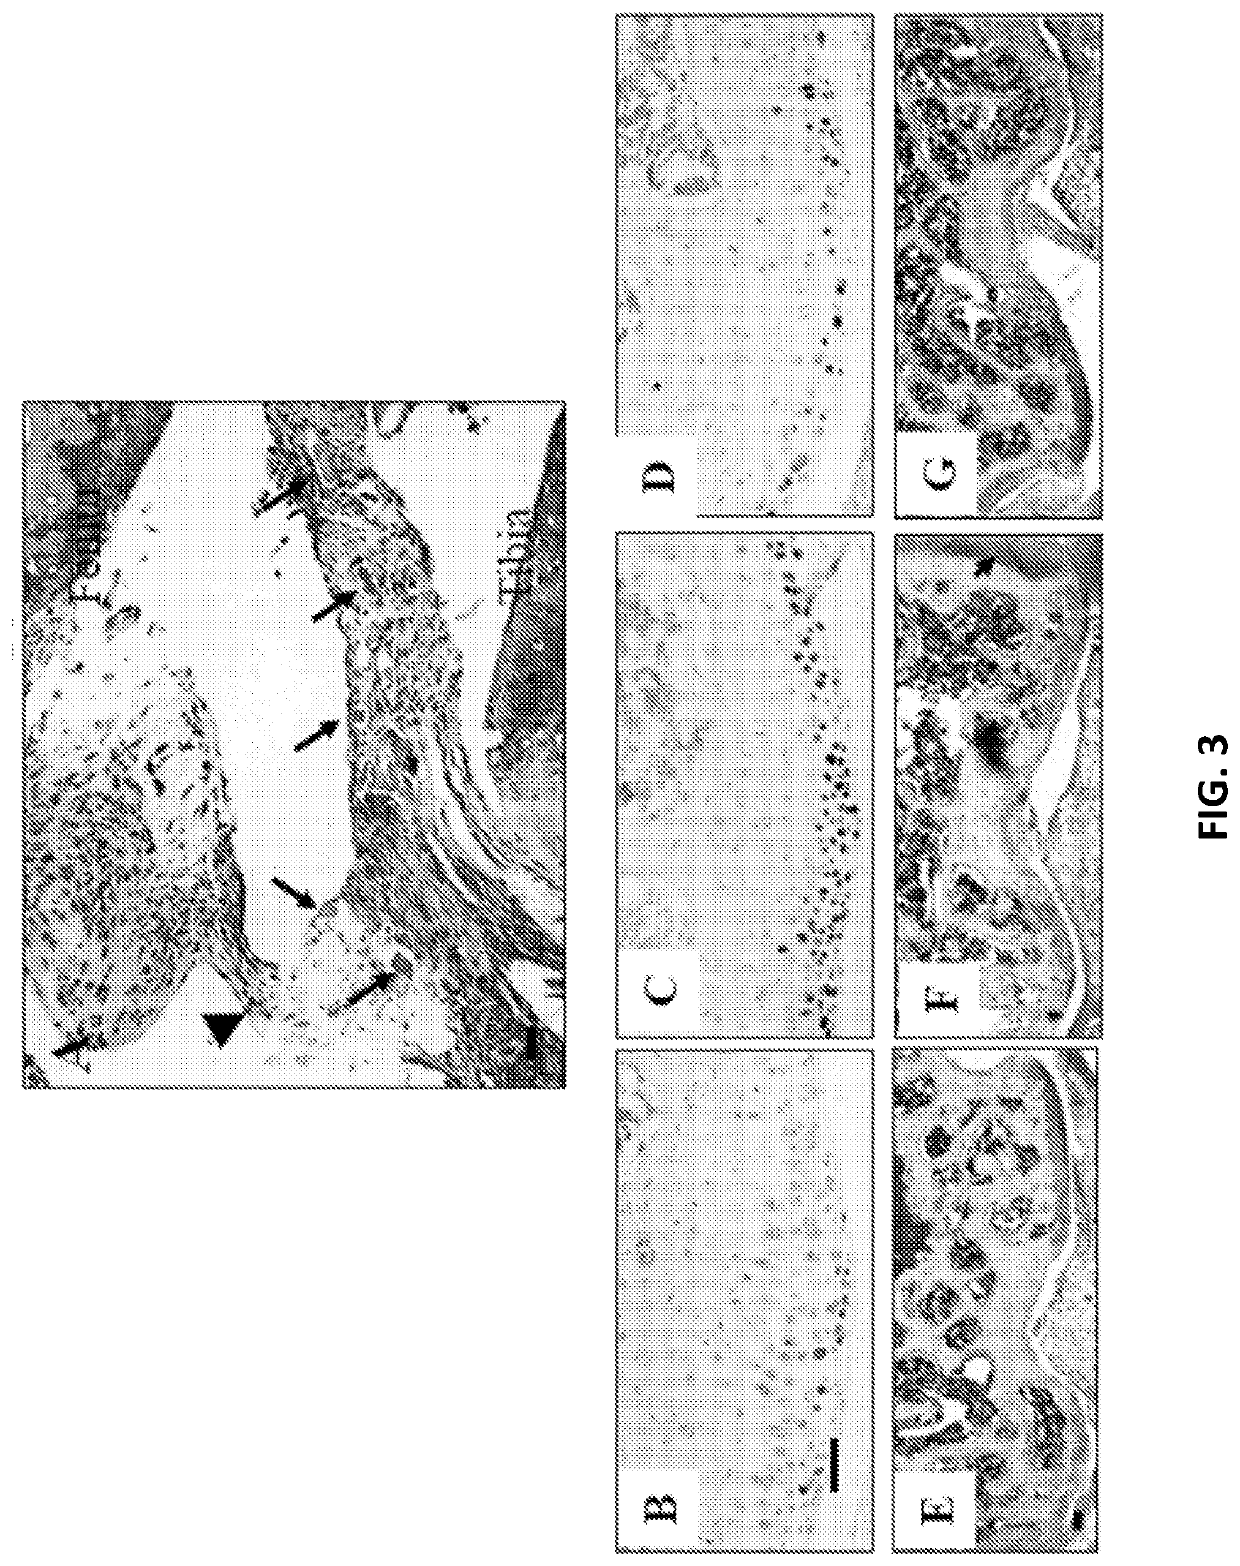 Prevention and Treatment of Osteoarthritis by Inhibition of Insulin Growth Factor-1 Signaling